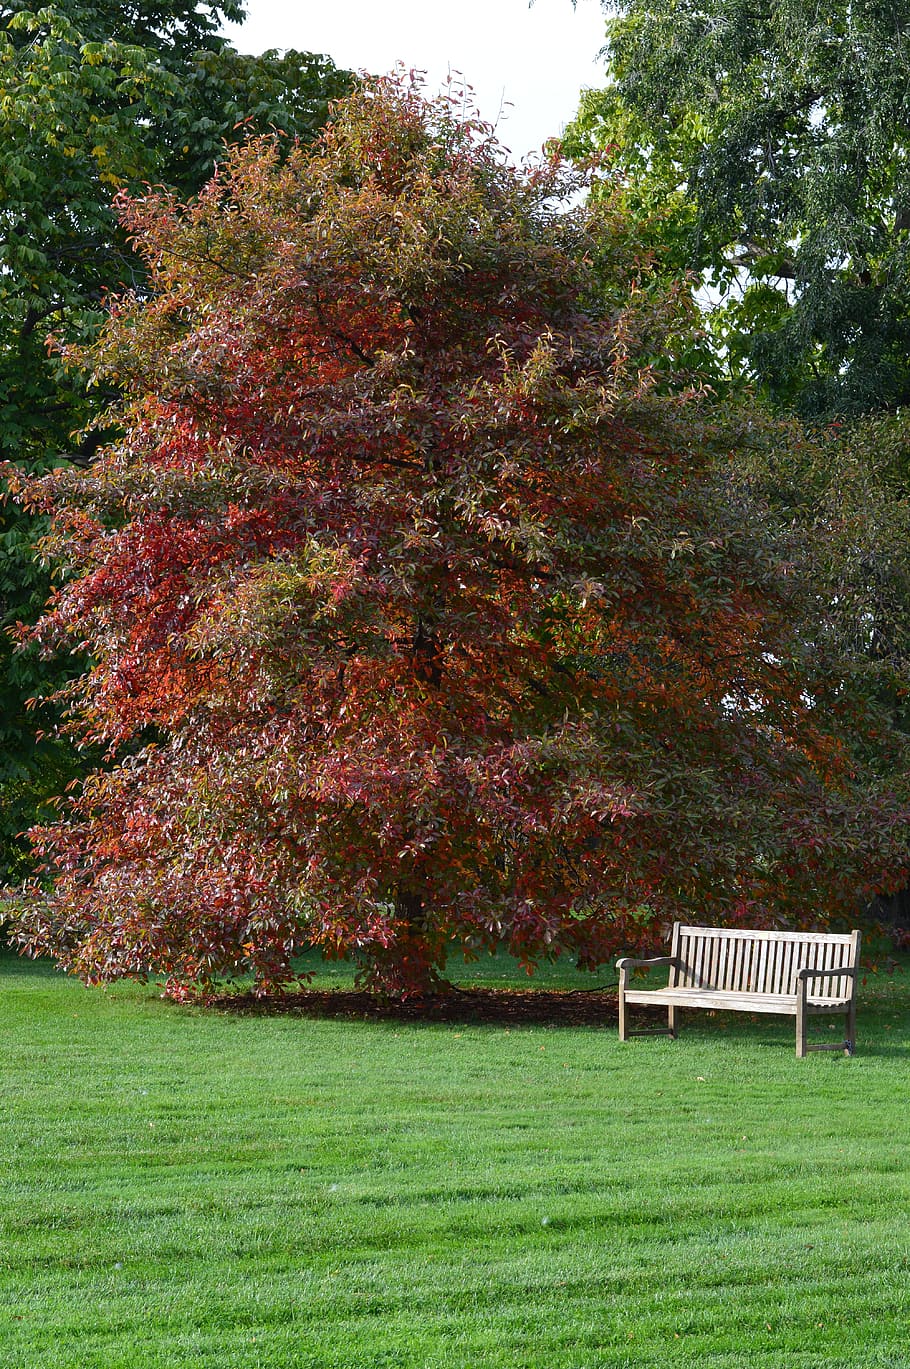 Trees, Red, Leaves, autumn, park, red, leaves, foliage, leafy, gardens, greenery